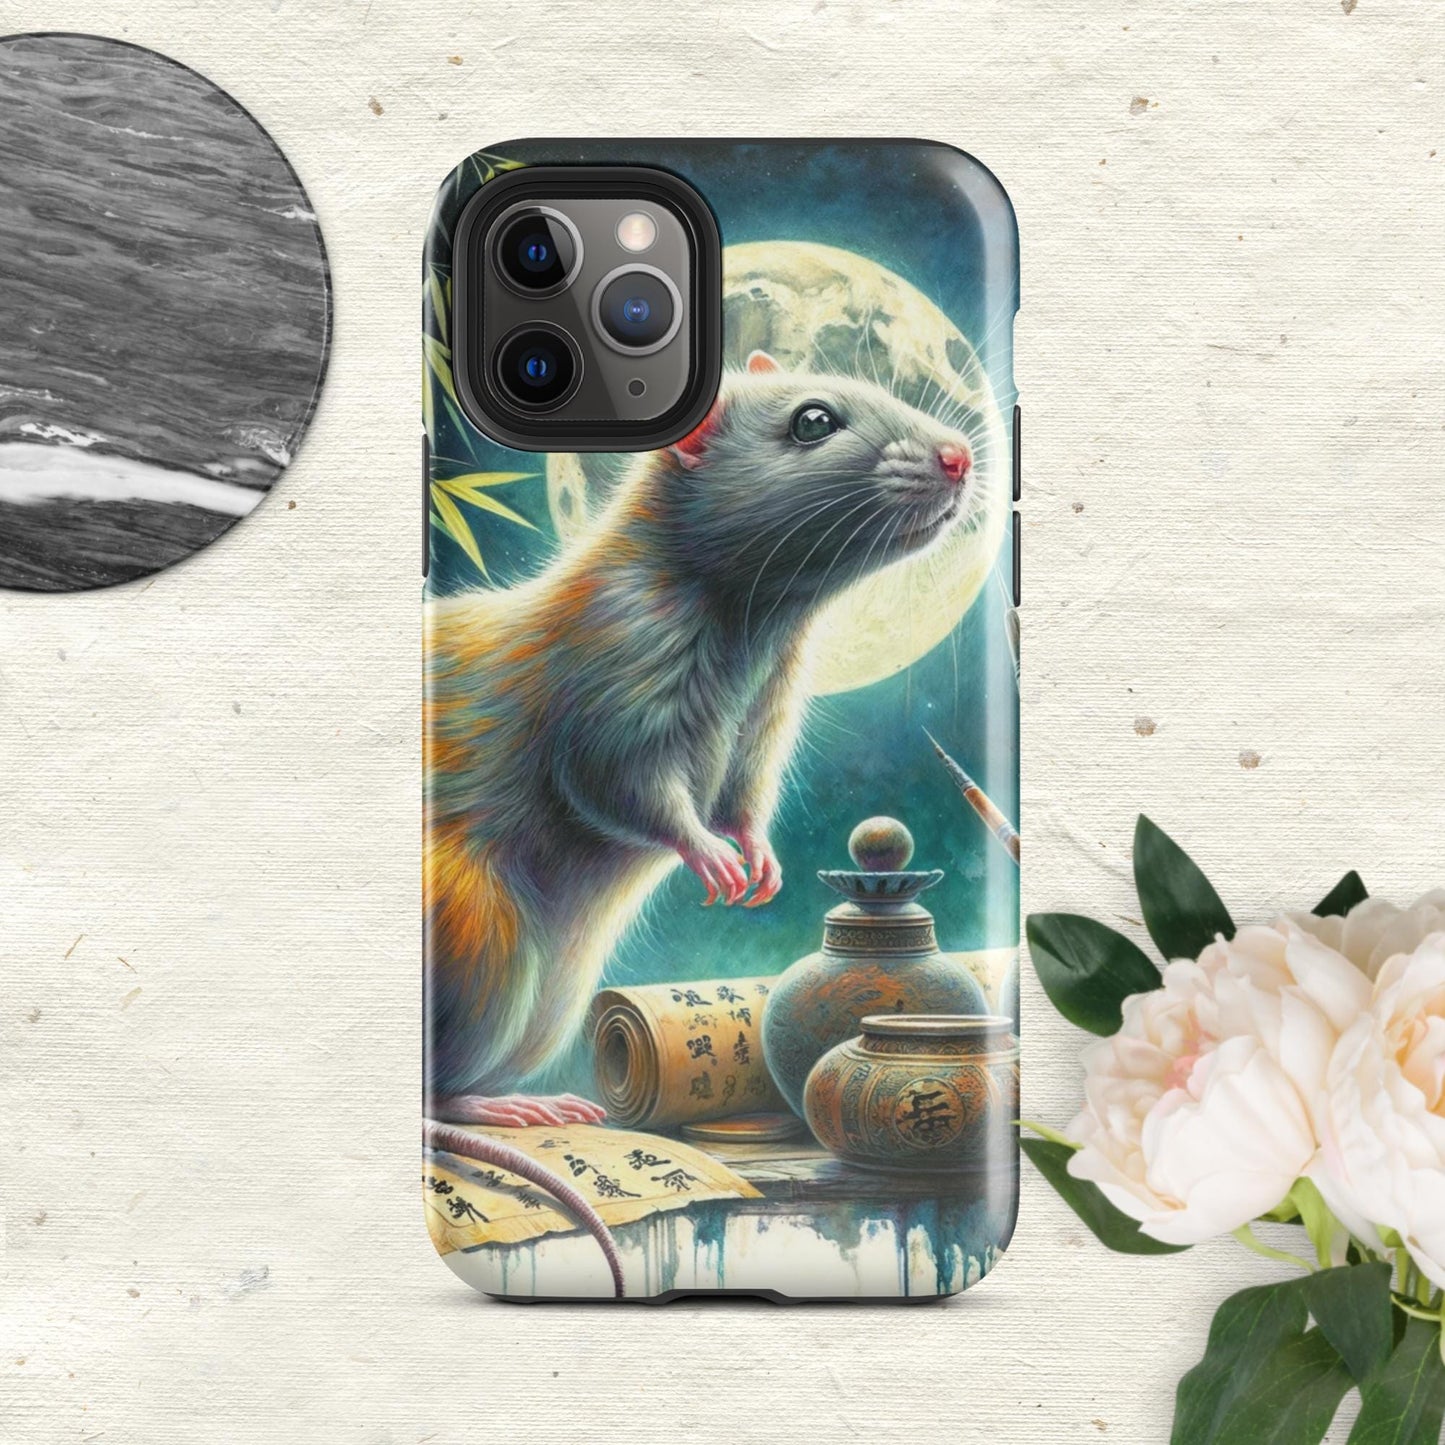 The Hologram Hook Up Glossy / iPhone 11 Pro Rat Tough Case for iPhone®